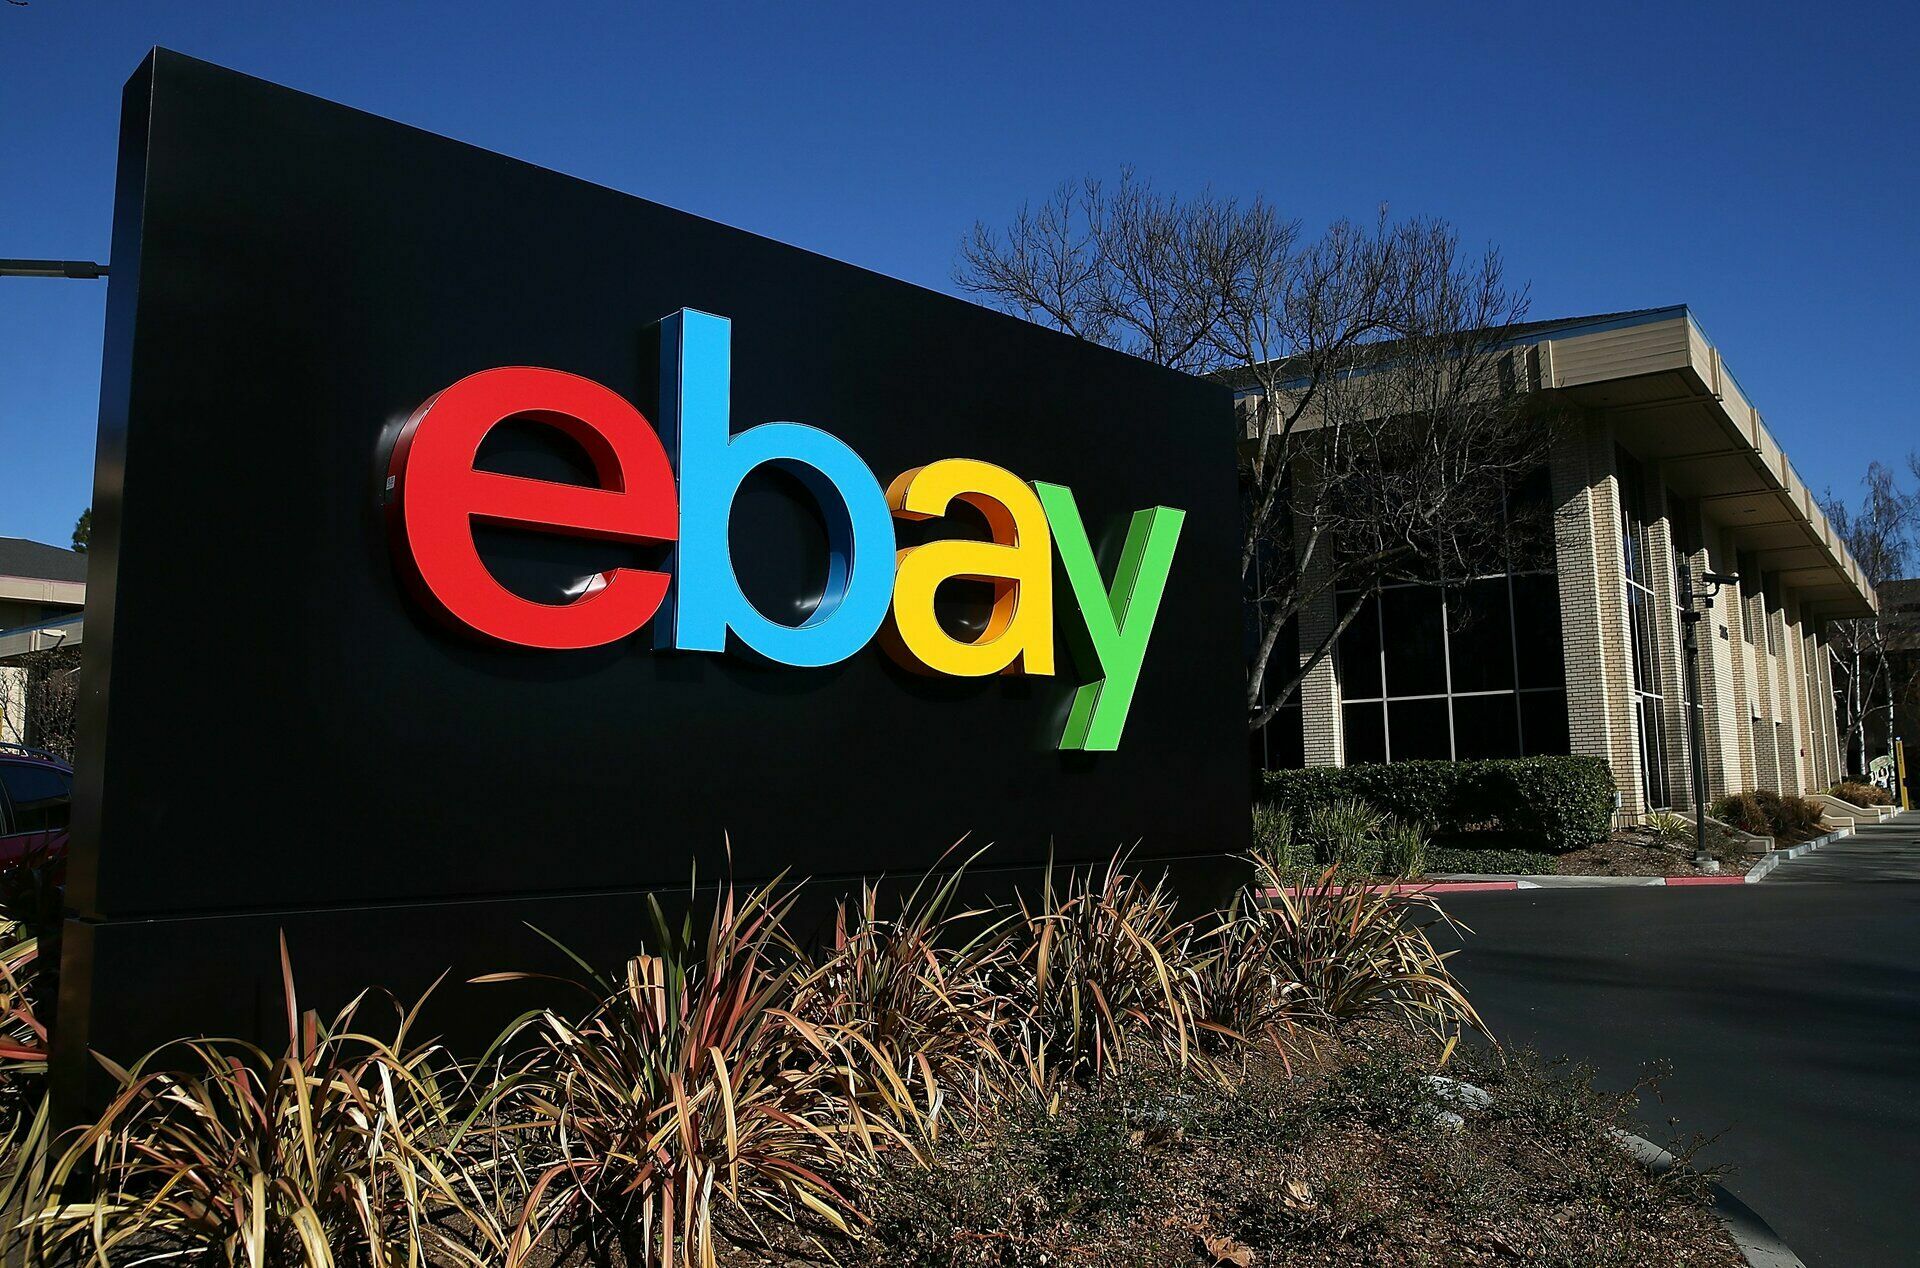 eBay has suspended delivery of goods to Russia and Ukraine